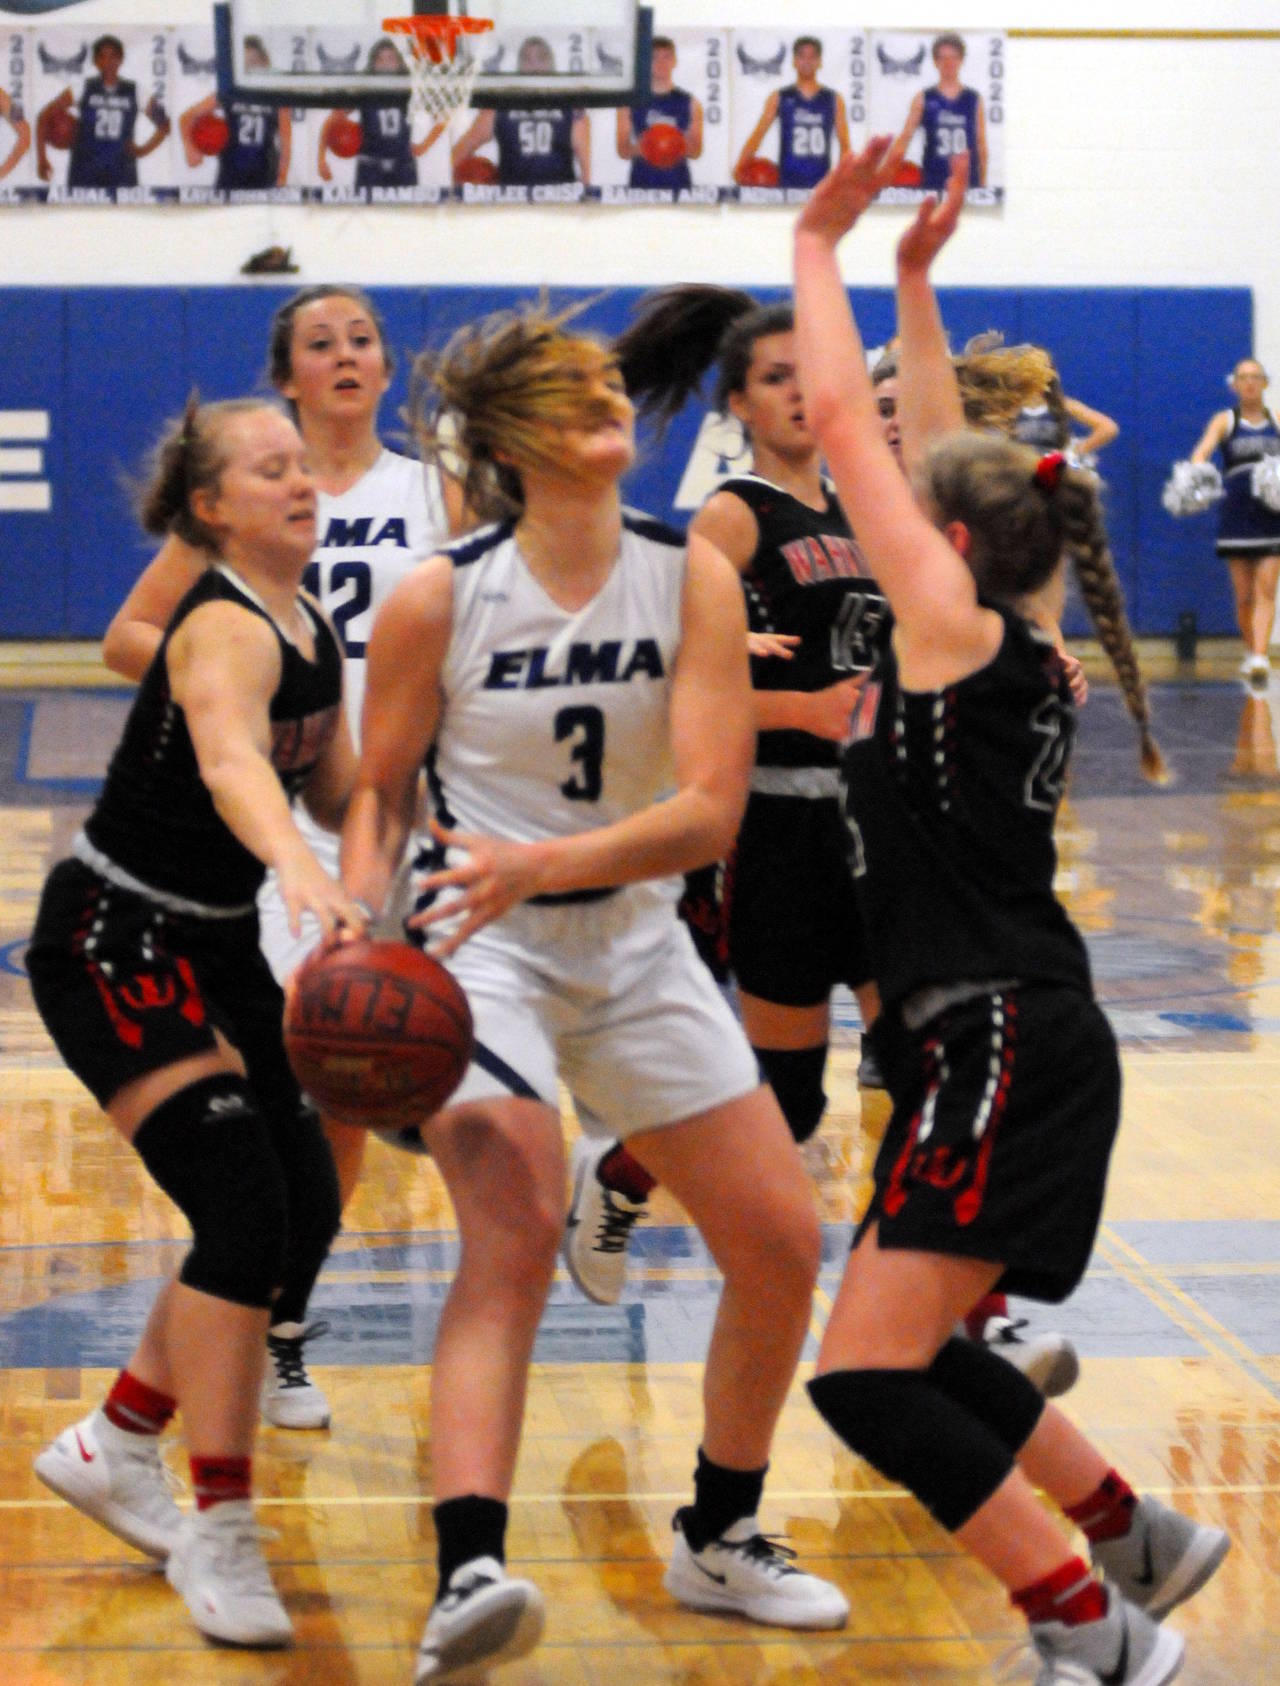 Elma’s Jalyn Sackrider is surrounded by Wahkiakum defenders during the Eagles’ 56-45 loss on Wednesday in Elma. (Ryan Sparks | Grays Harbor News Group)